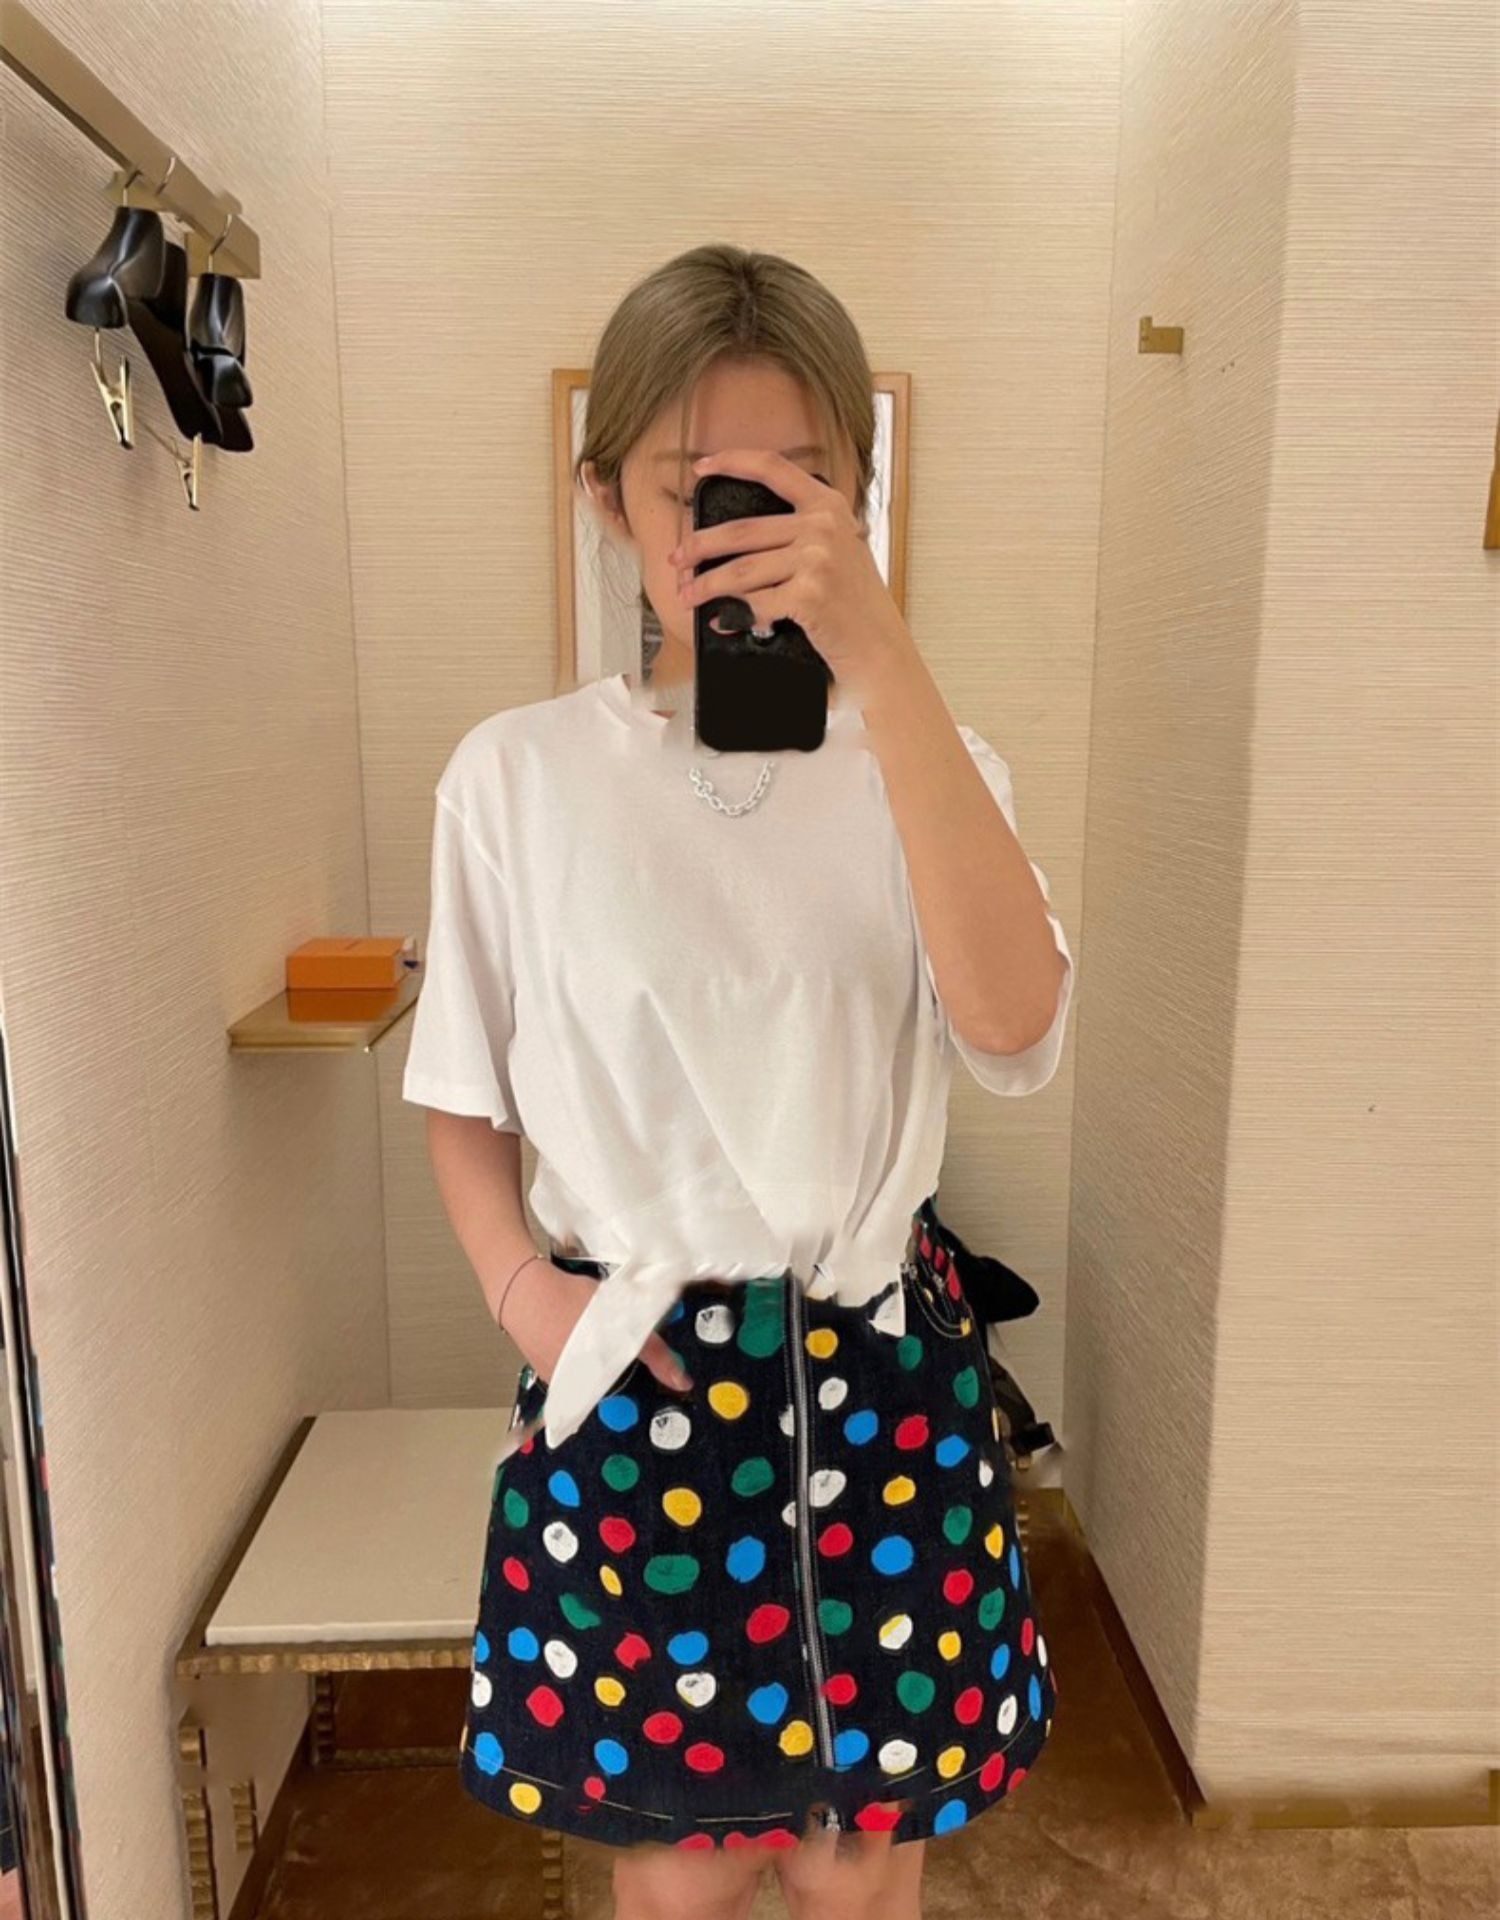 2023 Spring And Summer New Colorful Dotted Denim High Waist Zipper A-line Skirt Fashion